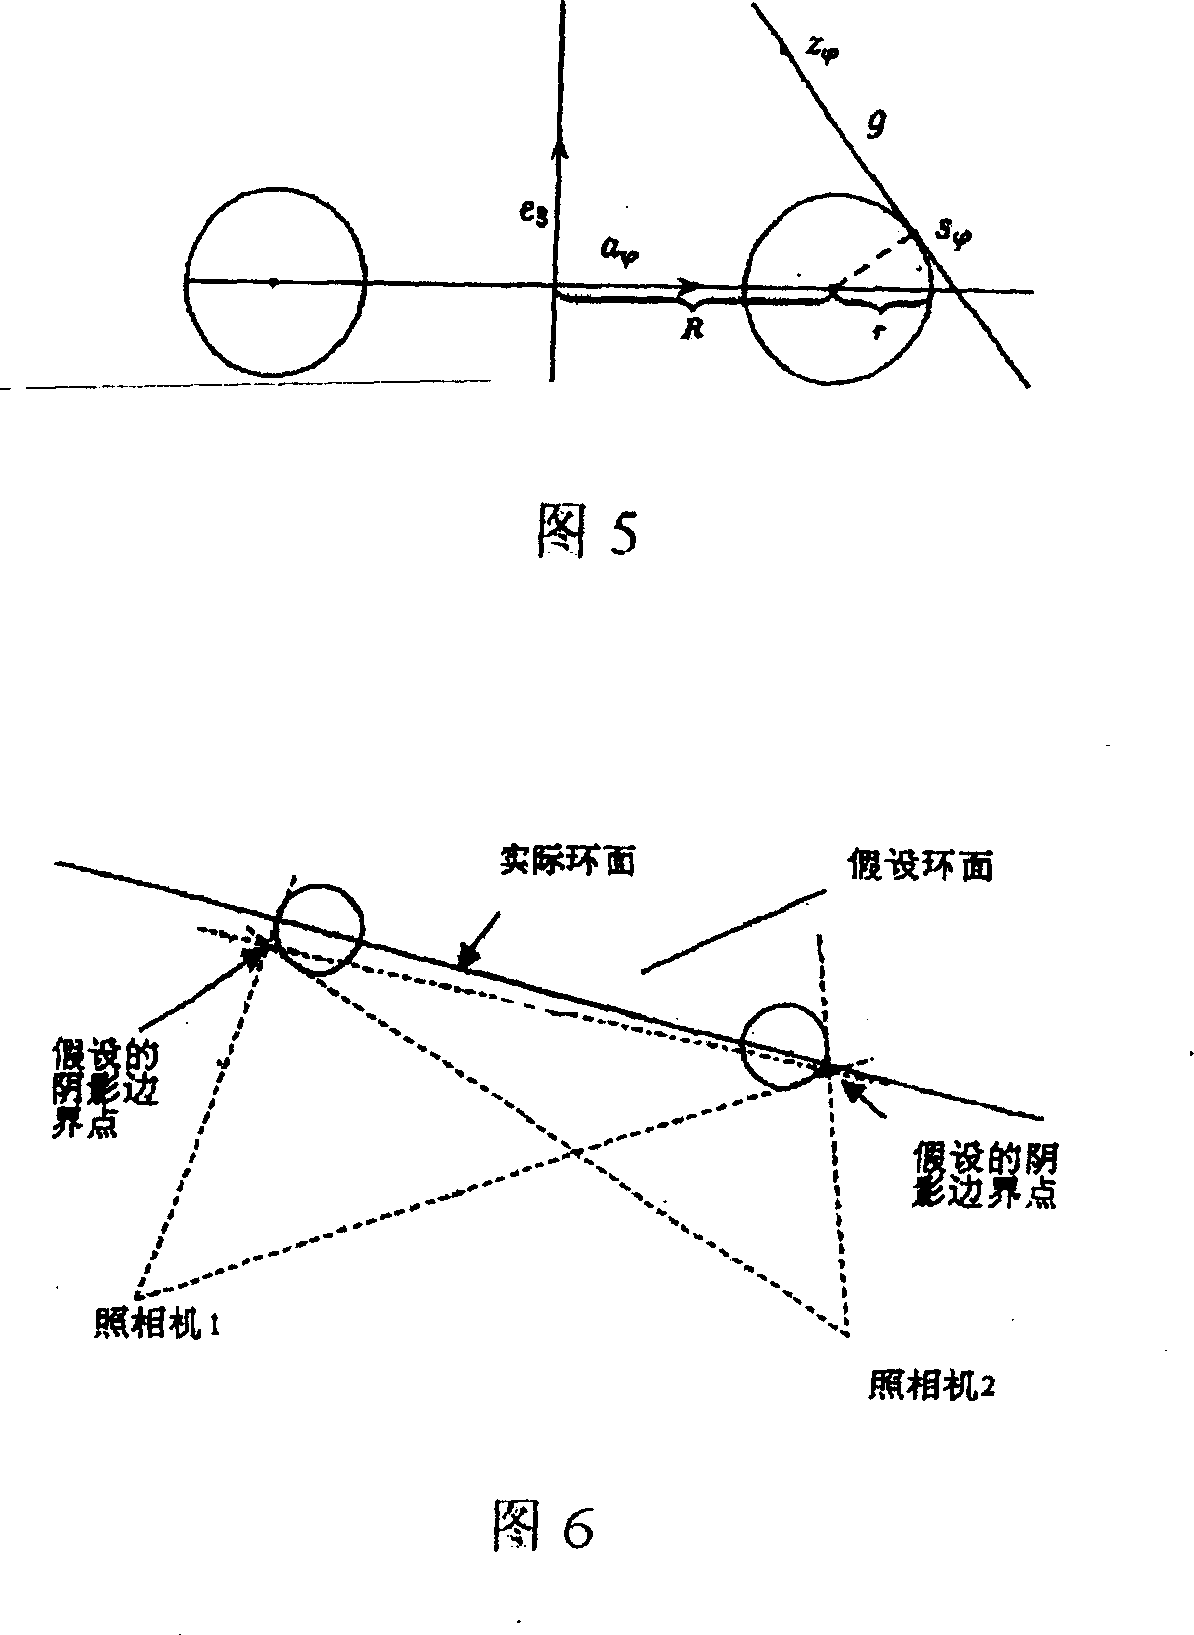 Measuring method and measuring unit for determining the spatial position of a wheel rim, and chassis measuring device